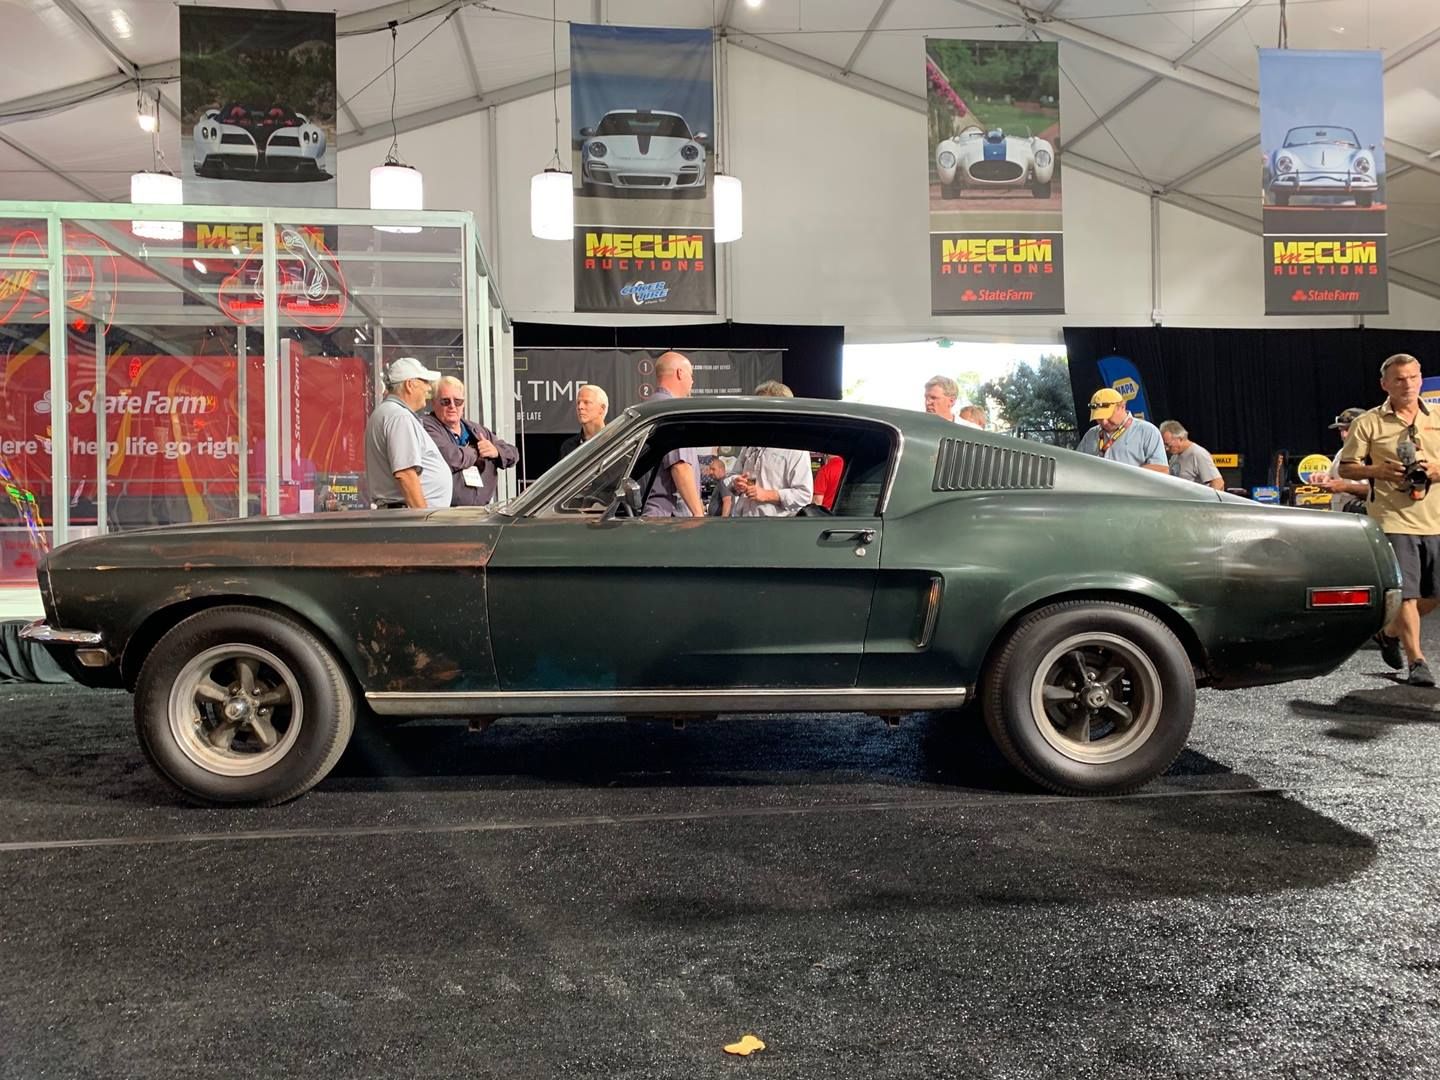 The Mustang from Bullitt sold for a record amount.